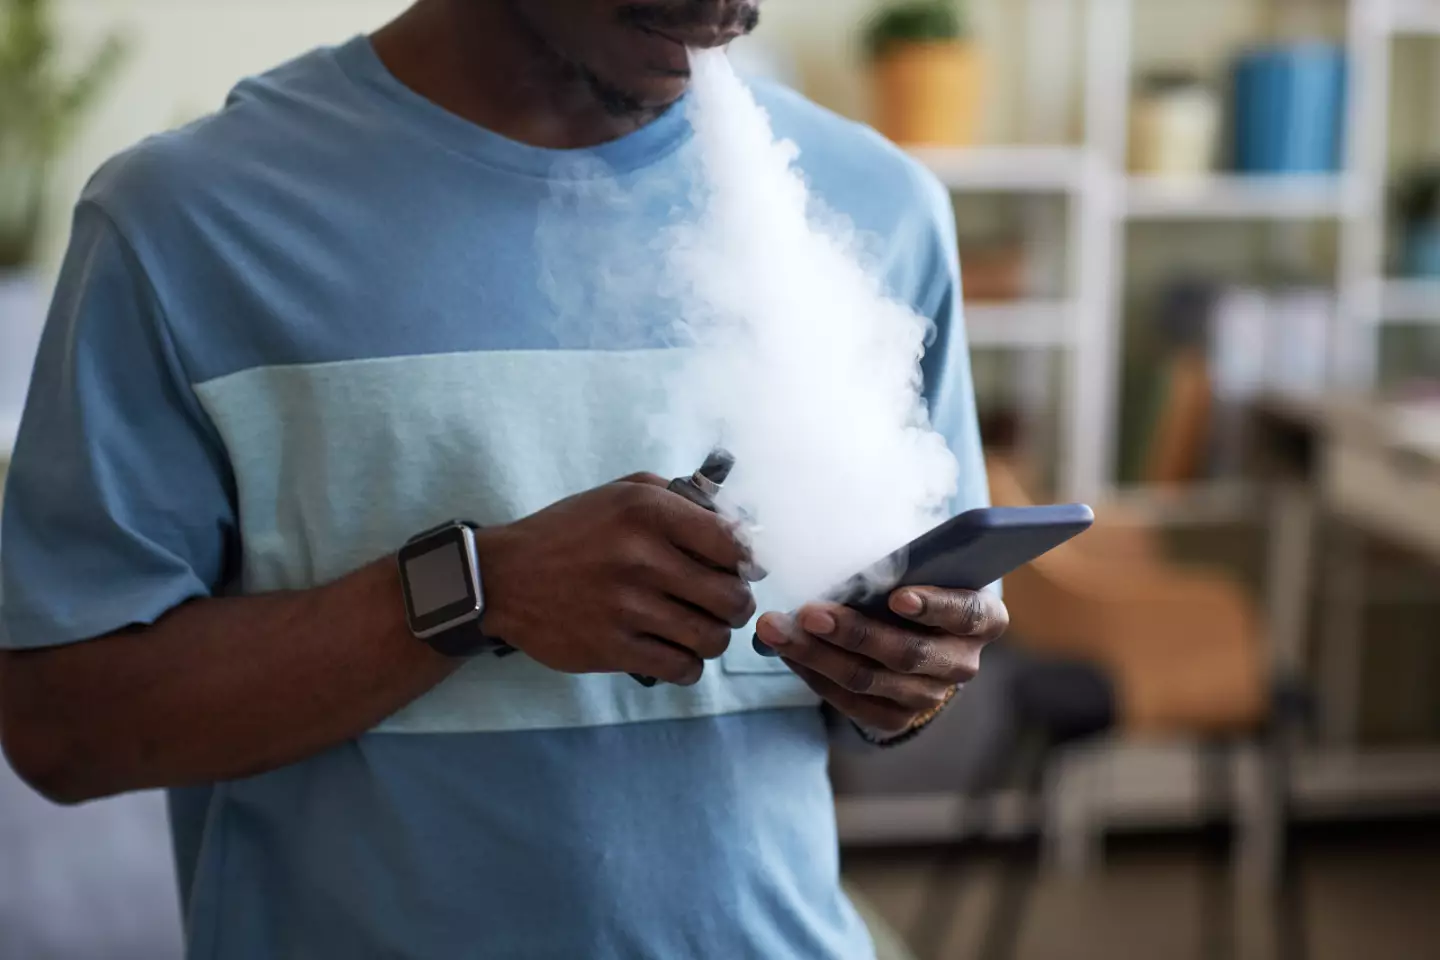 Vaping can have major impacts on your health.